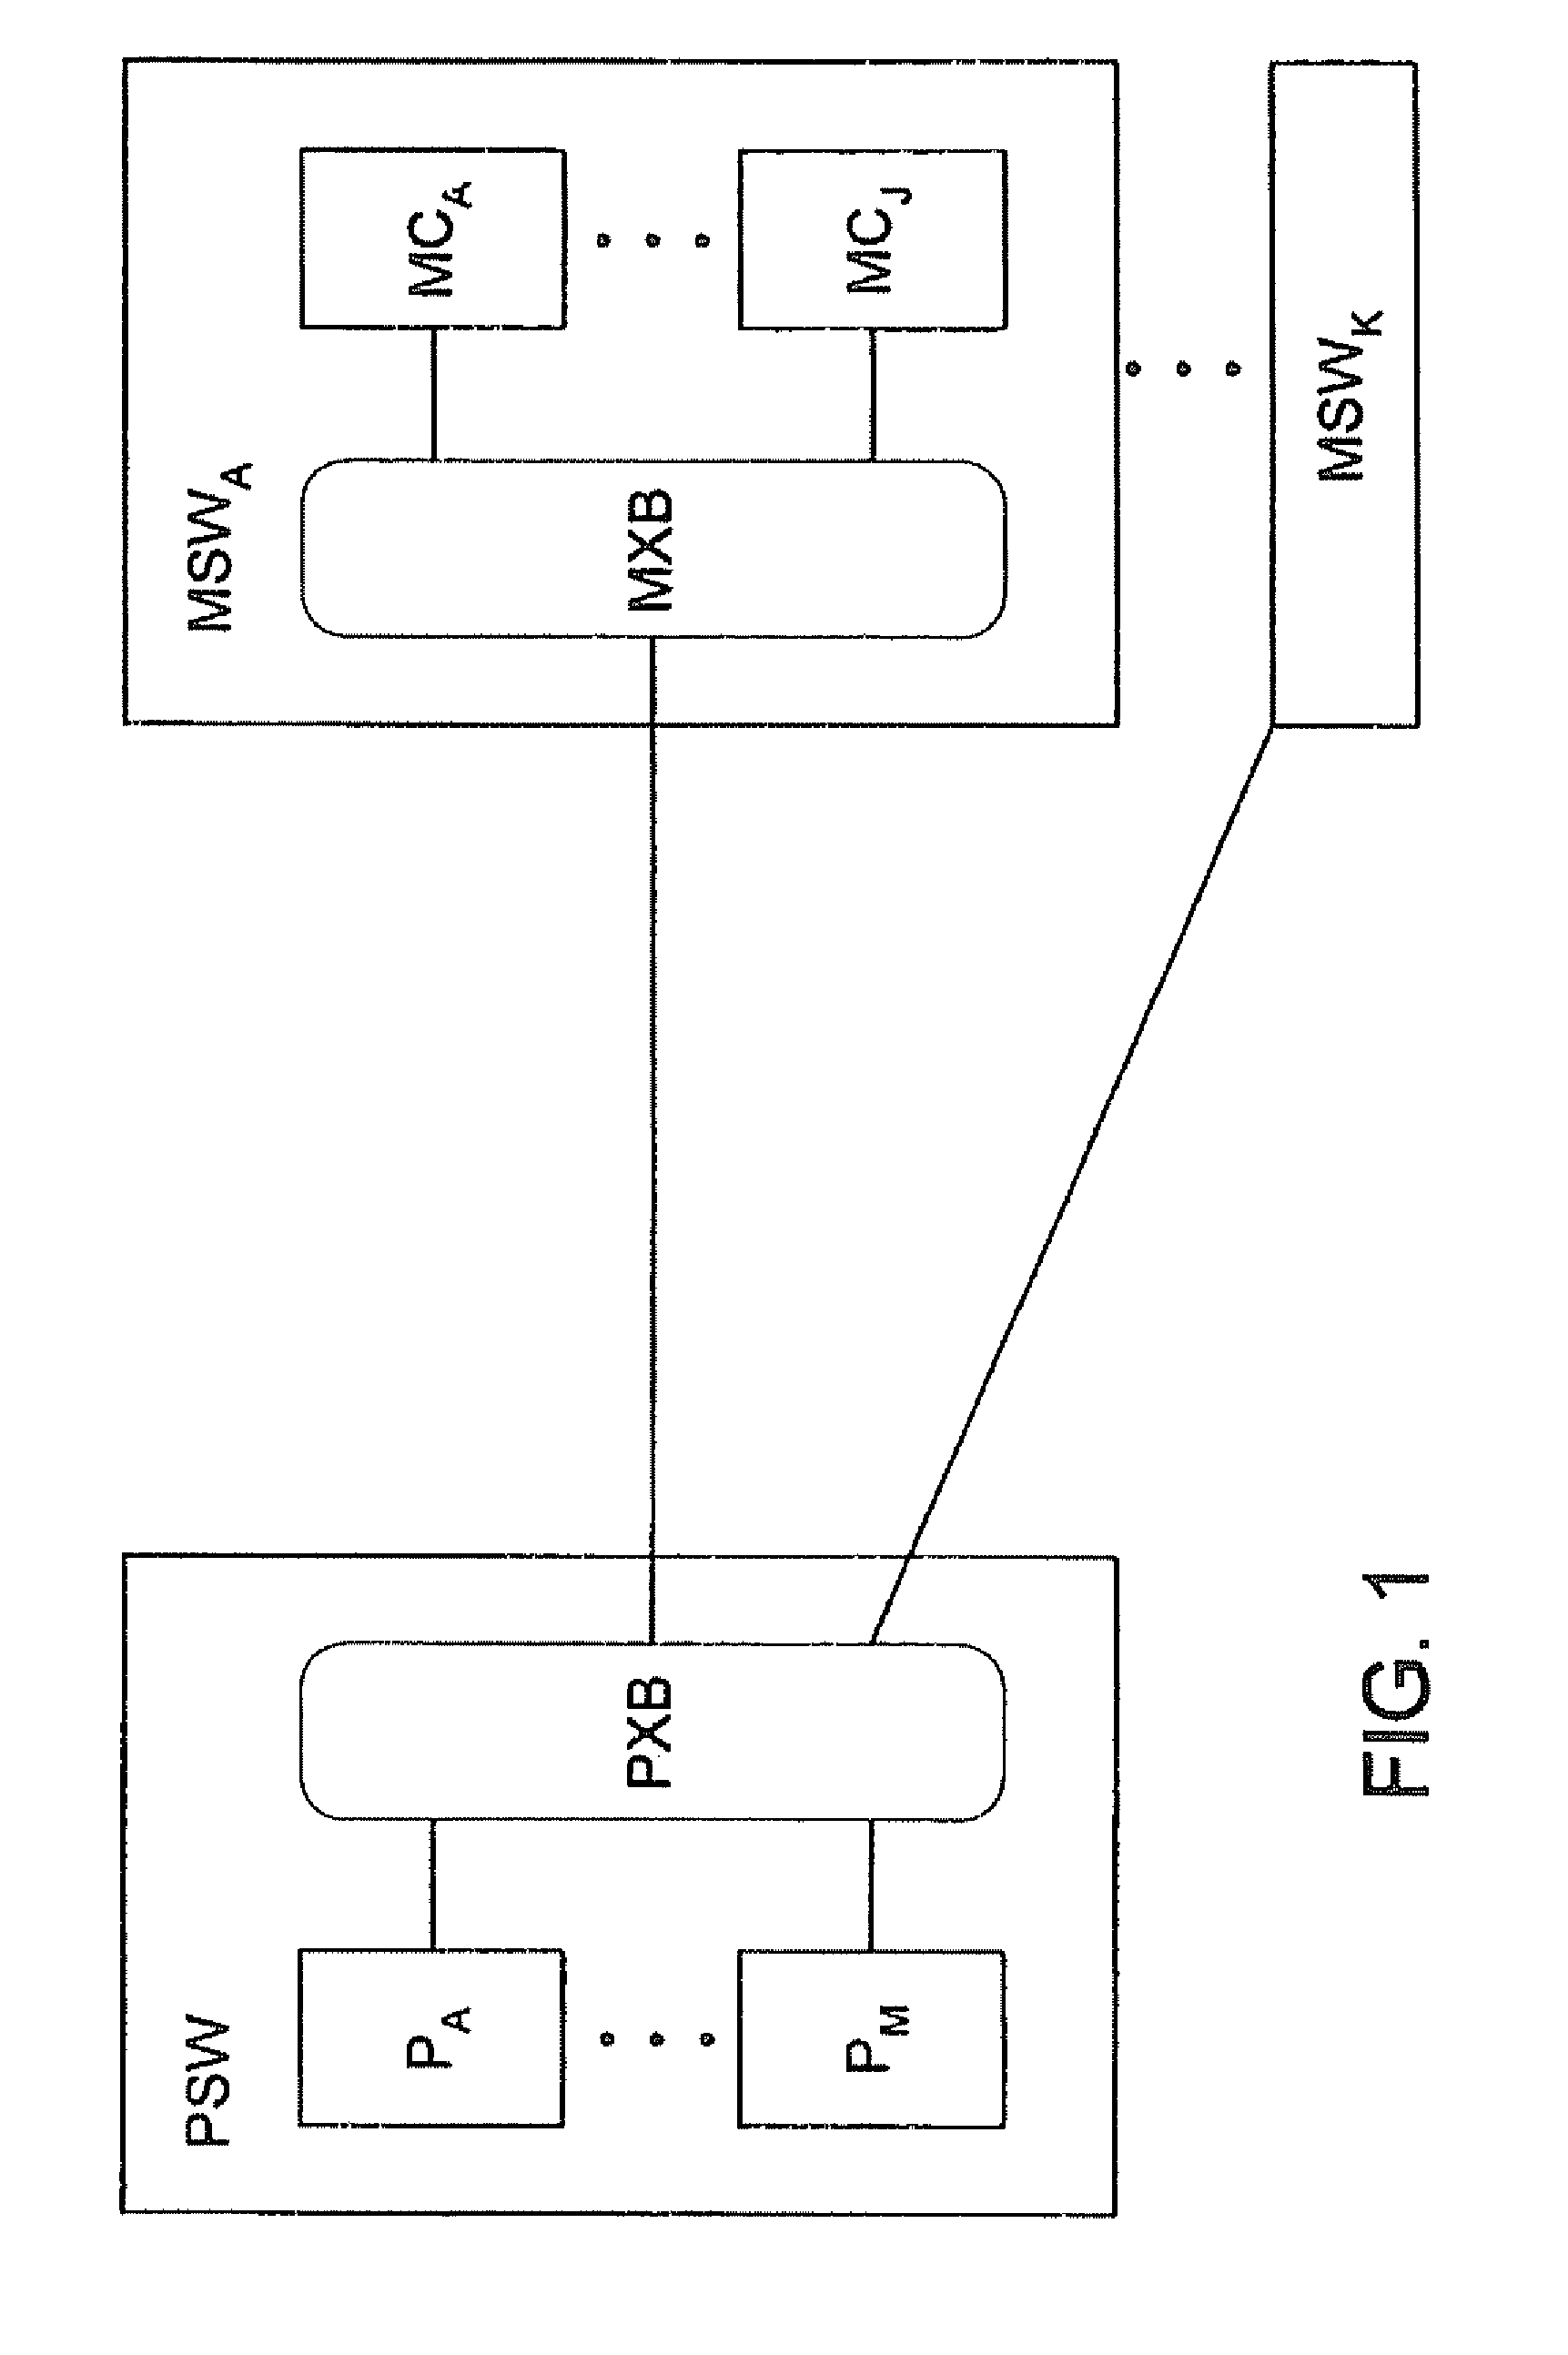 Layered crossbar for interconnection of multiple processors and shared memories